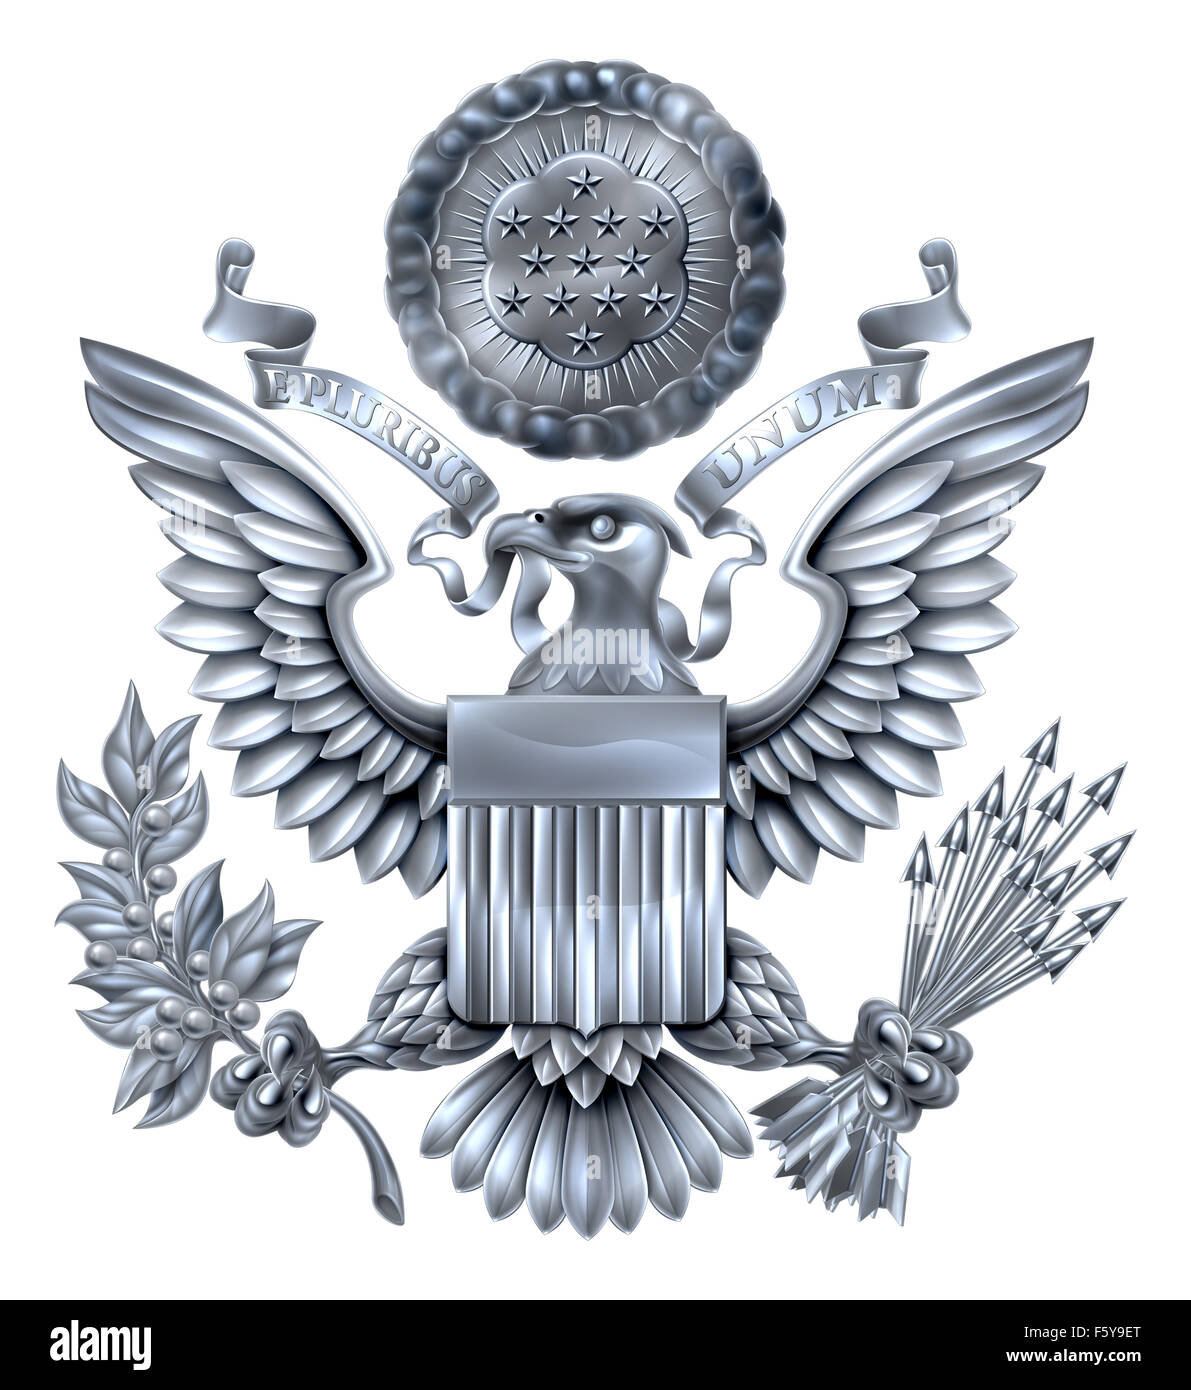 Silver Great Seal of the United States American eagle design with bald eagle holding an olive branch and arrows with American fl Stock Photo